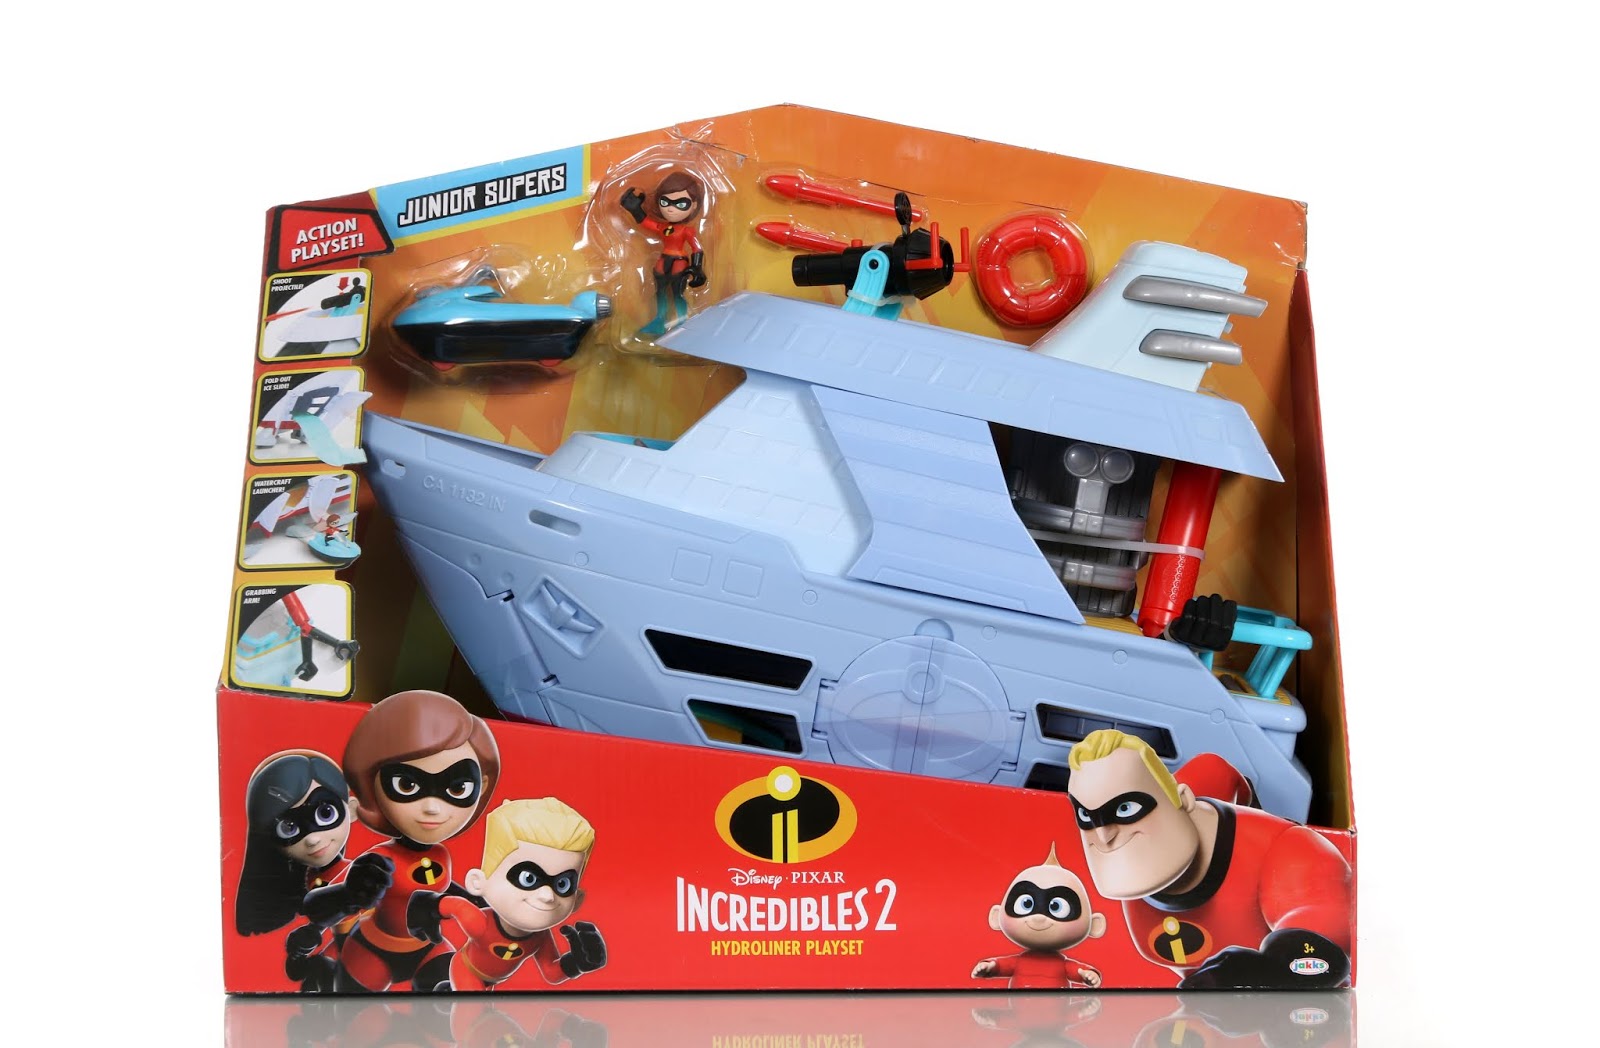 Action Playset comes with Elastigirl Junior Super Figure The Incredibles 2 Hydroliner Ship